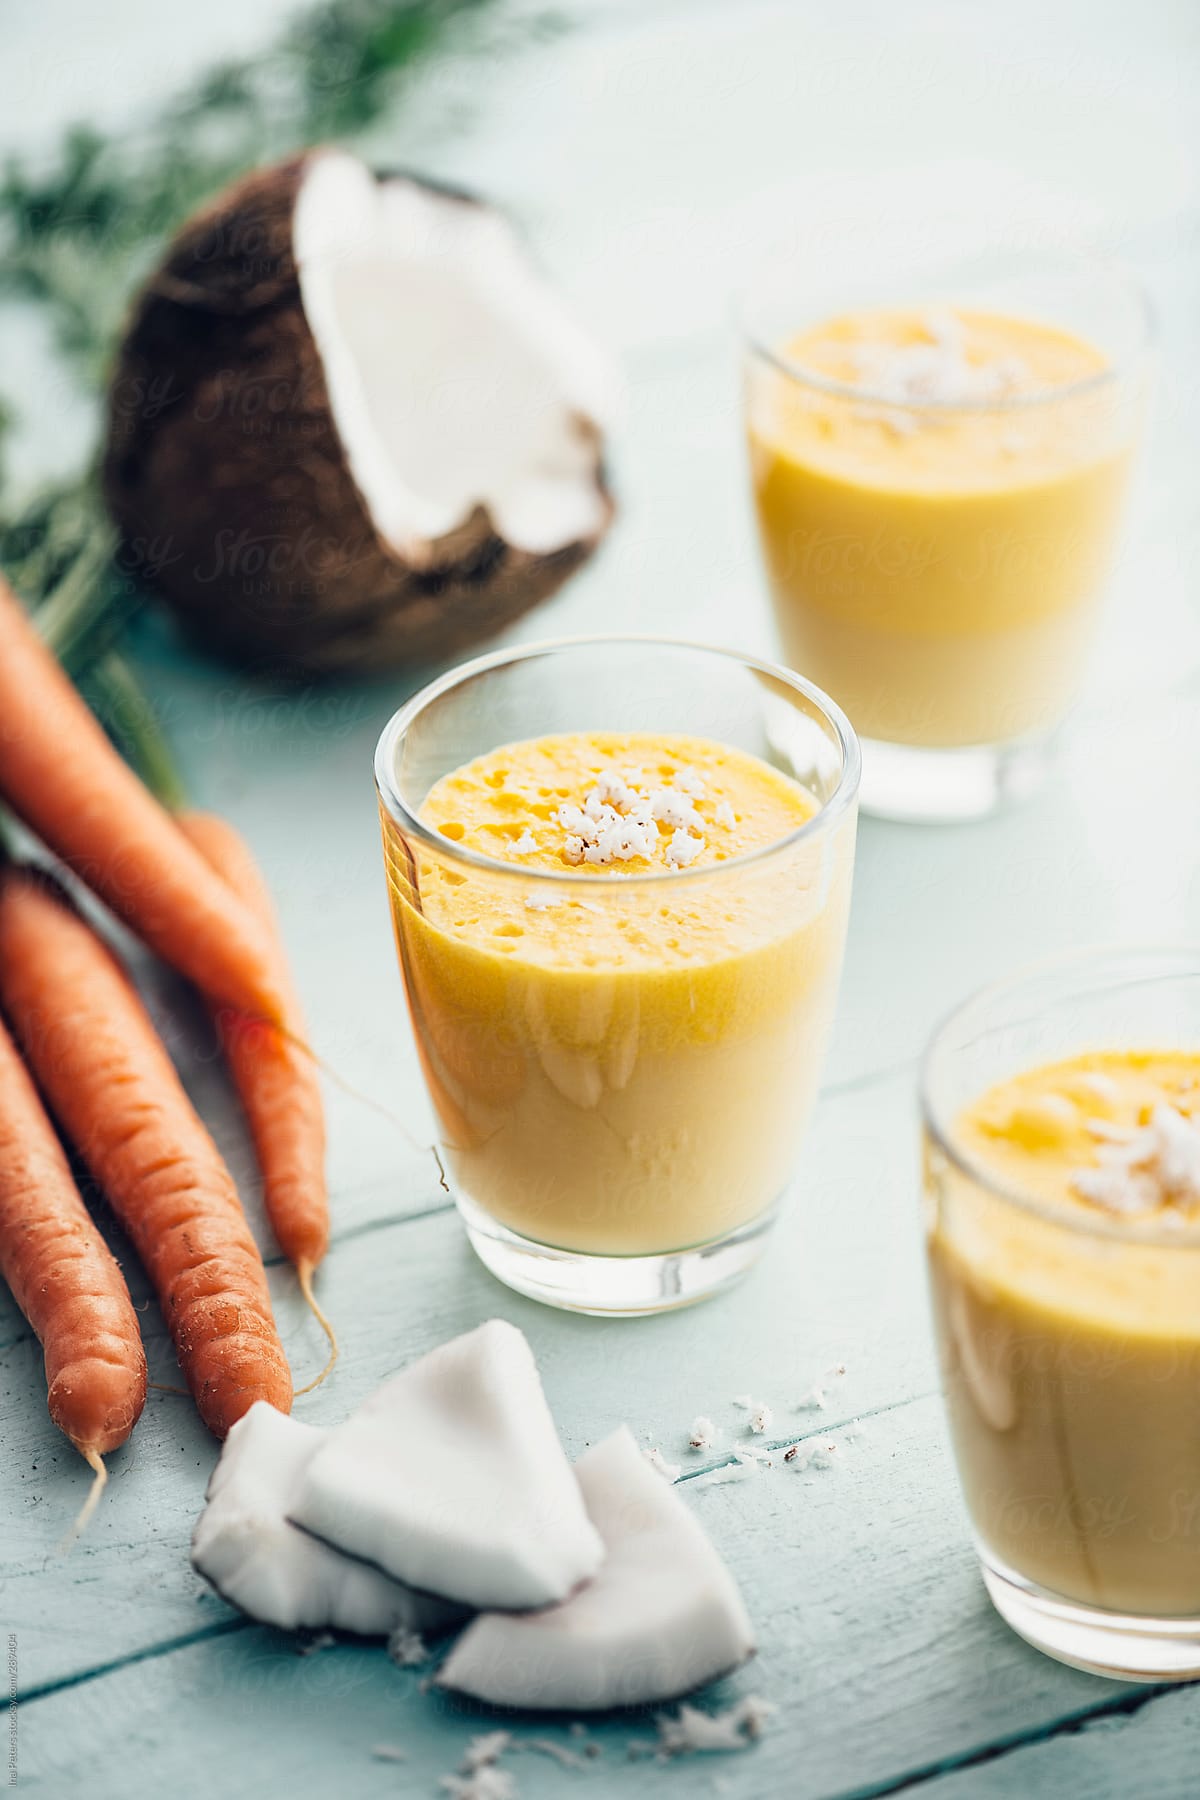 Food: Coconut, Carrot and Orange Smoothie